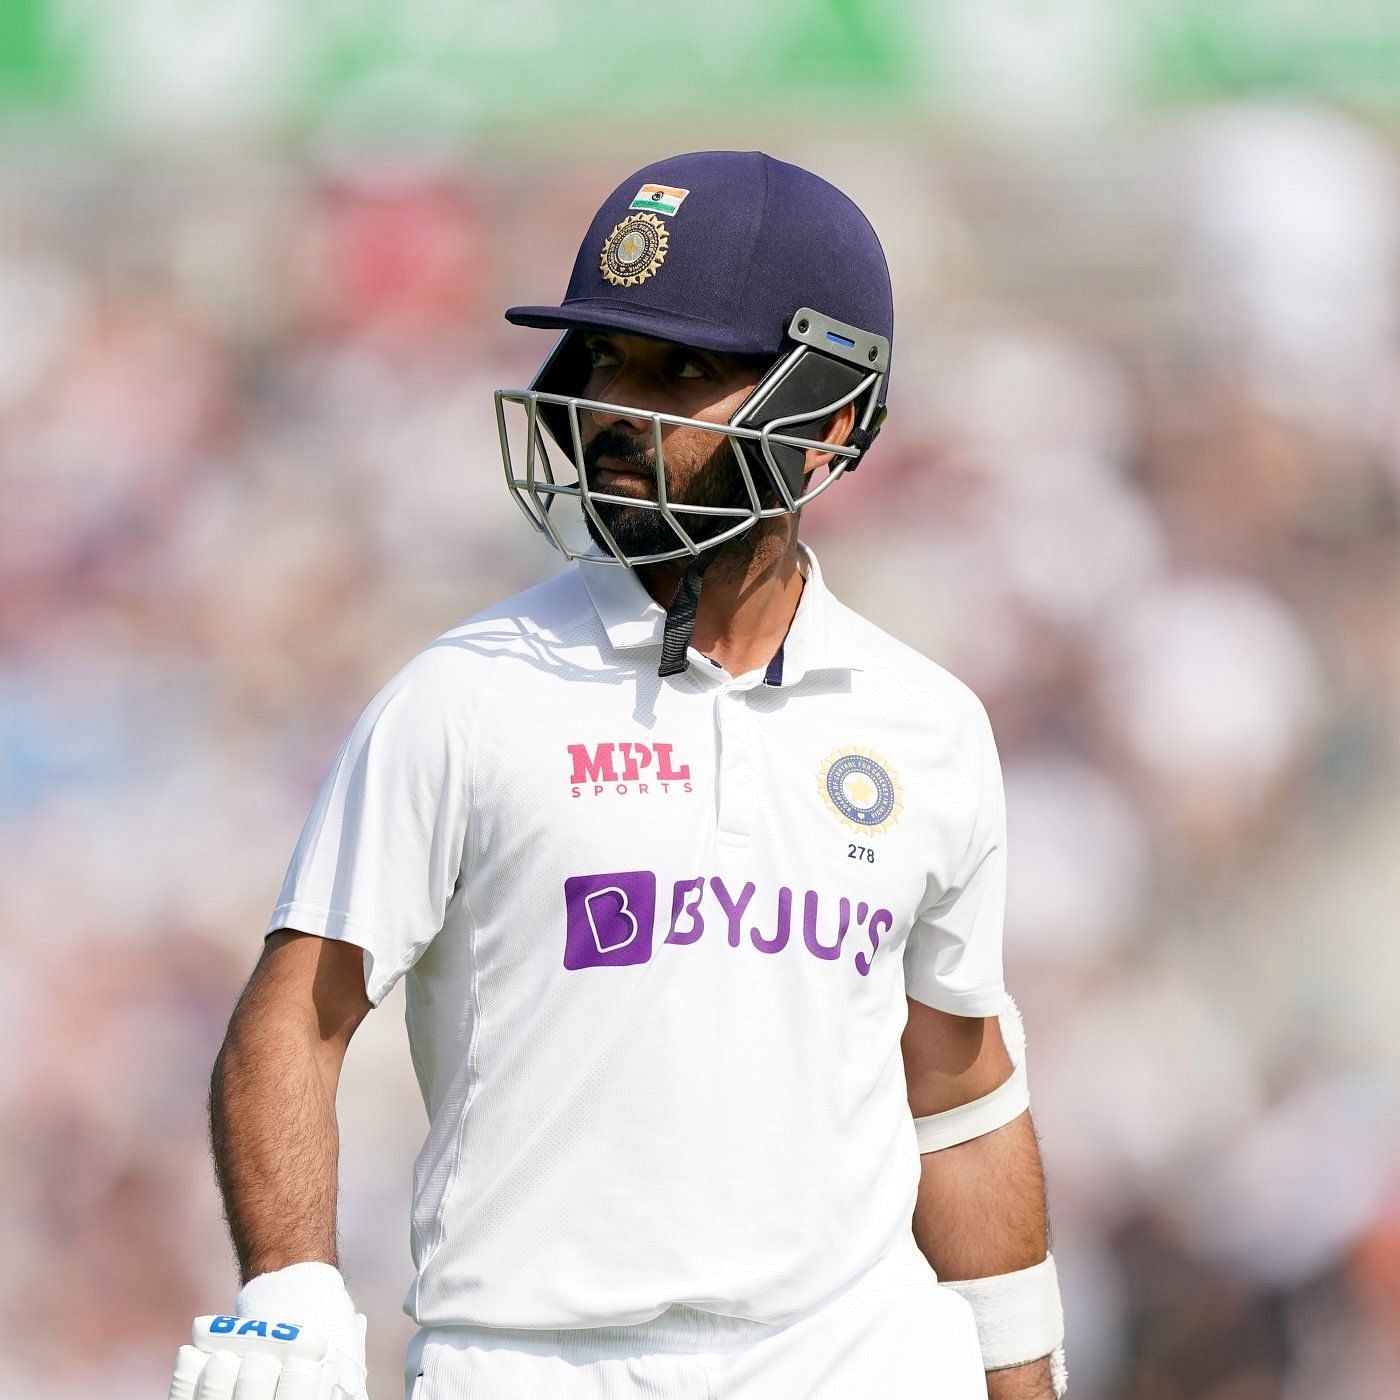 Rahane managed just 4 in the 2nd innings [Image- BCCI]